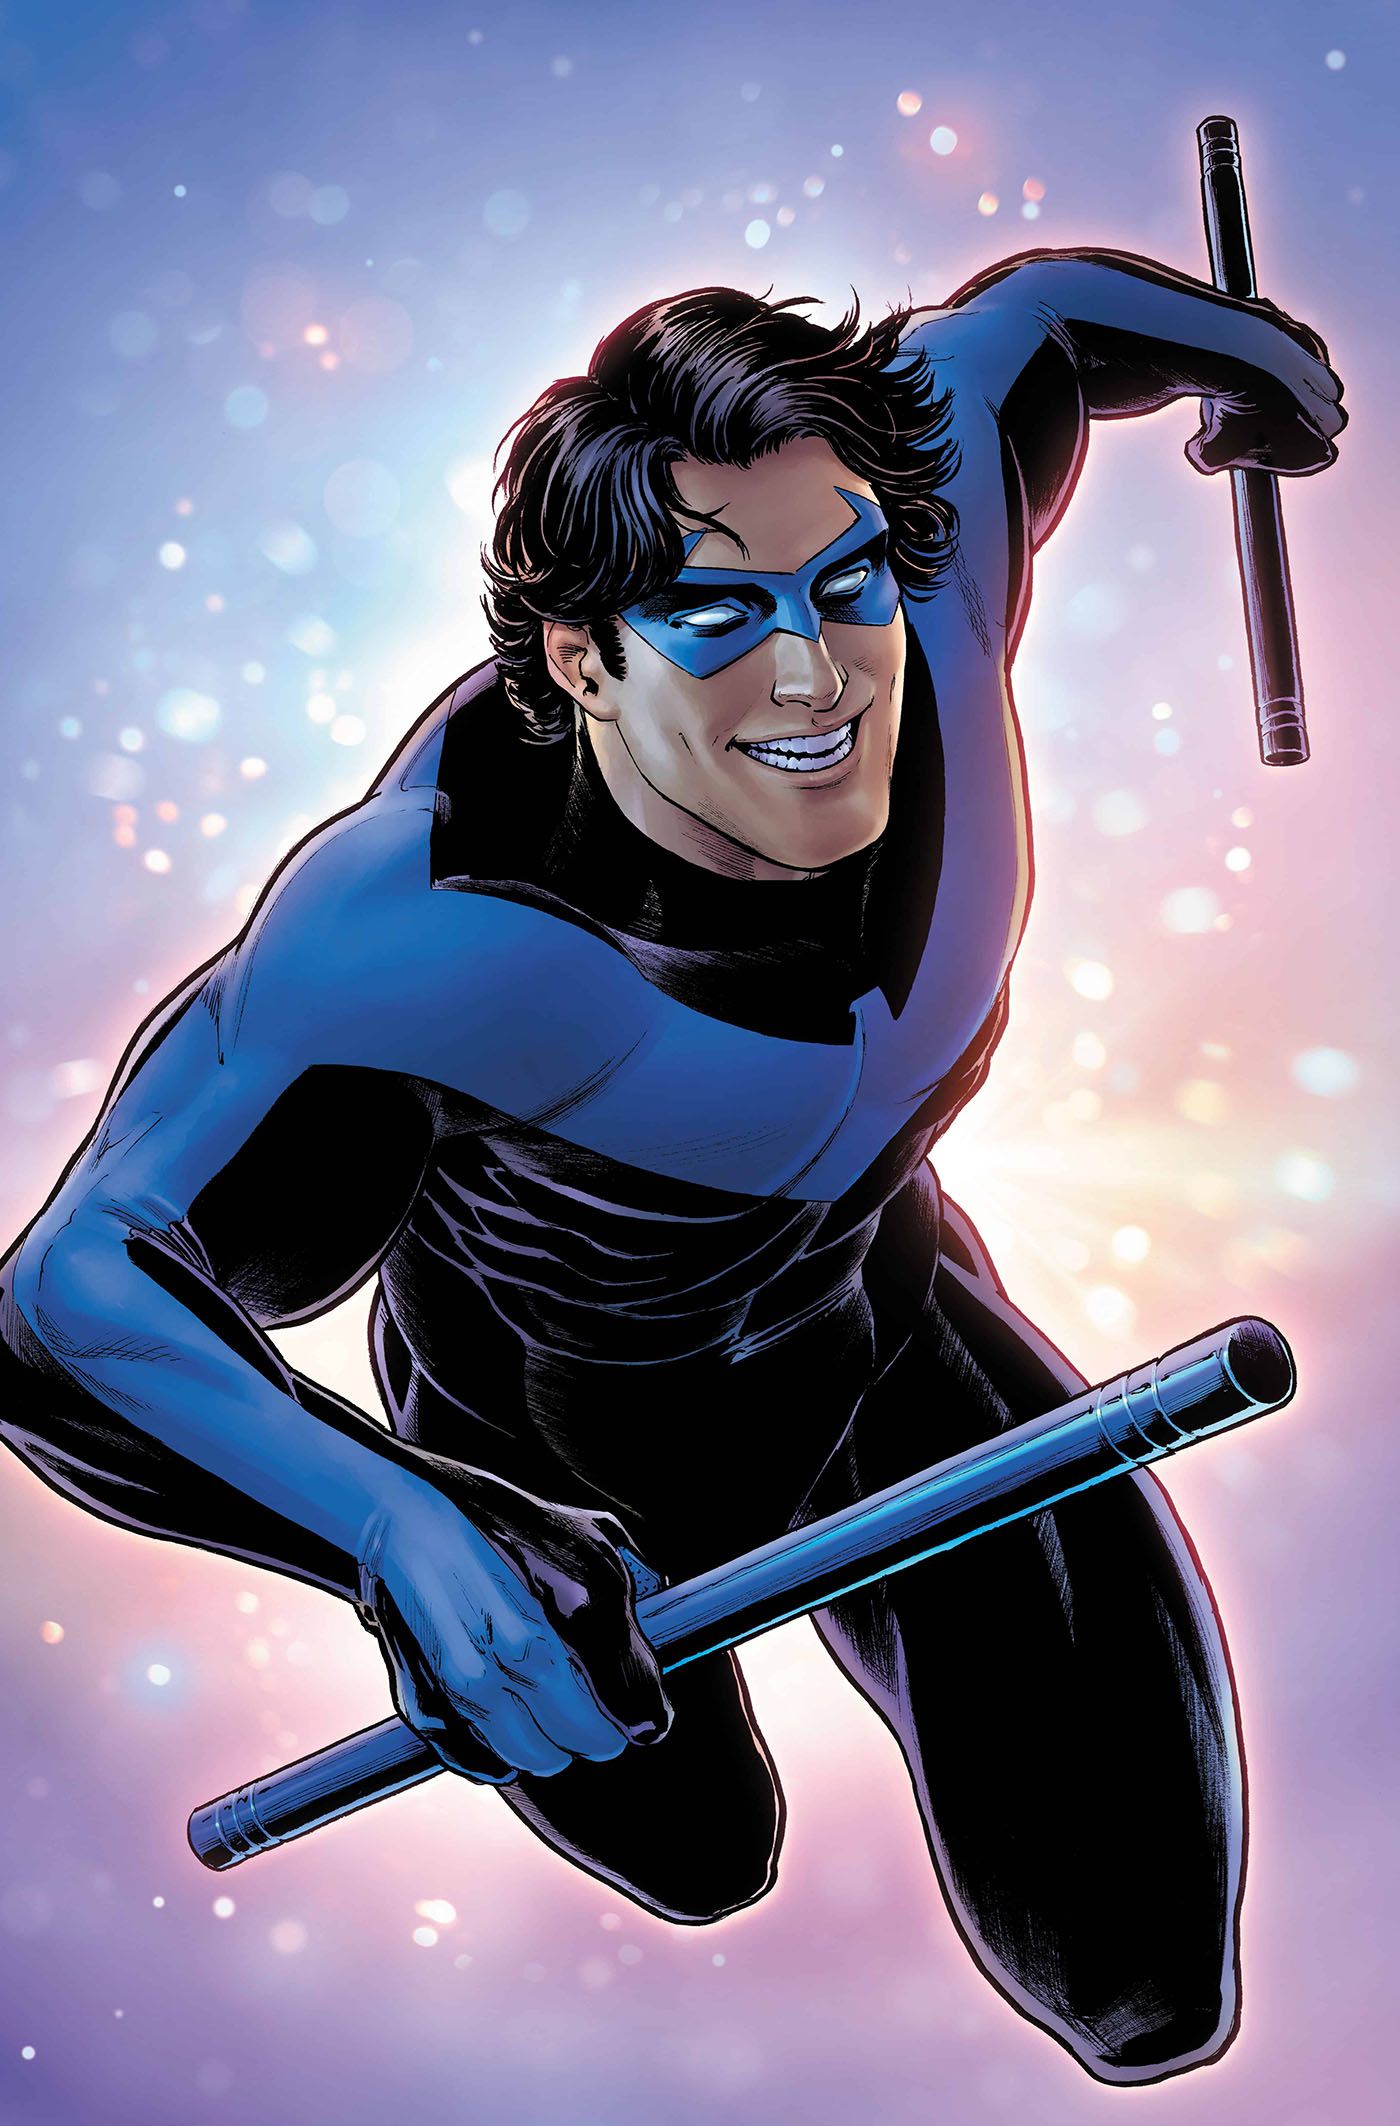 DC's I Know What You Did Last Crisis Scott Variant Cover: A grinning Nightwing leaps towards the viewer with escrima sticks.